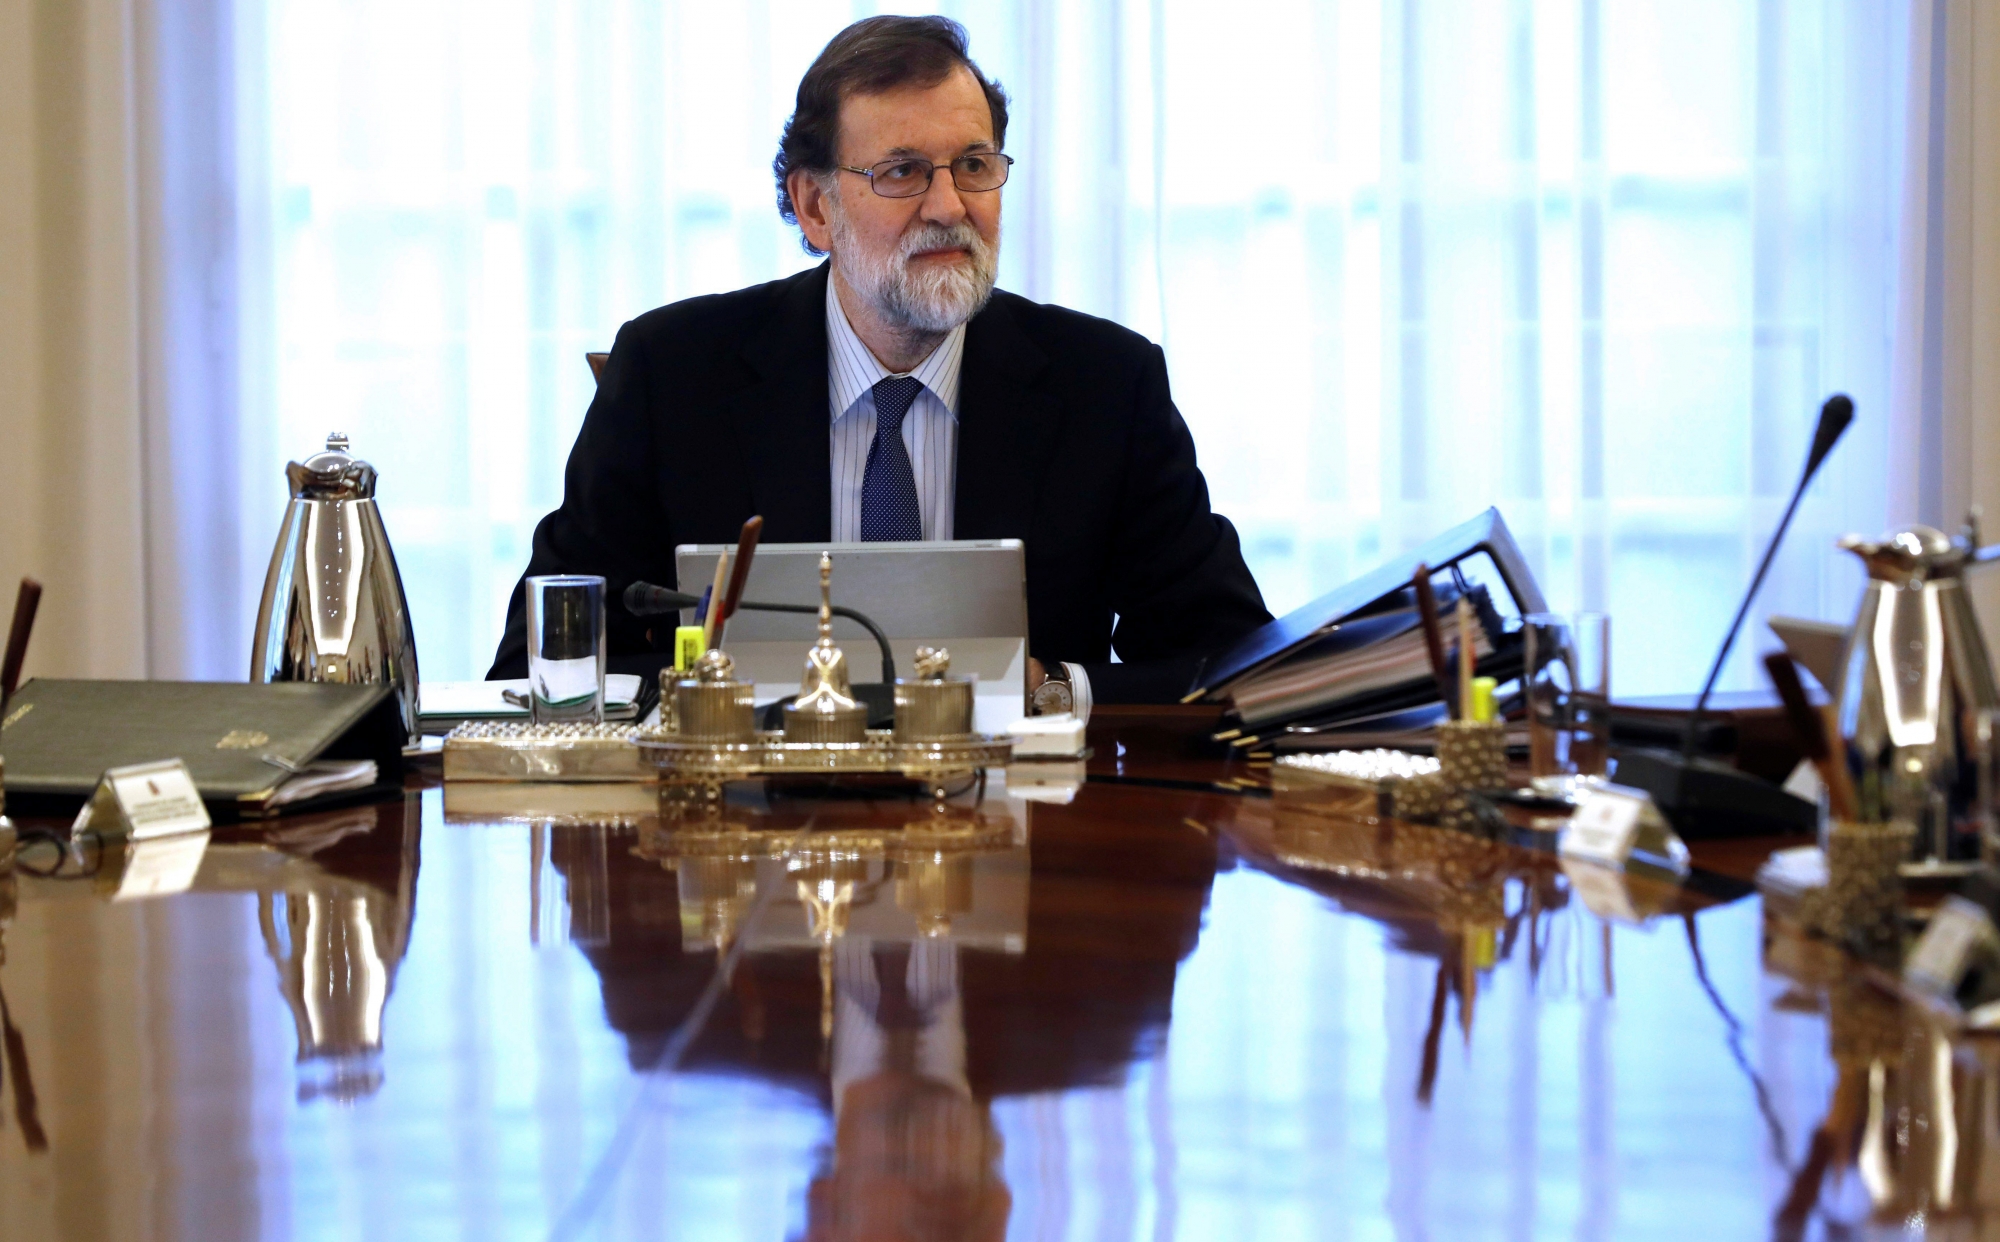 epa06432870 A handout photo made available by the Spanish Prime Minister office showing Spanish Prime Minister, Mariano Rajoy, chairing the Cabinet meeting, in Madrid, Spain, 12 January 2018. During the Cabinet a royal decree on the rights of expotation of audivisual soccer content was approved as well as a modification of a decree regarding to bullying at school.  EPA/PRIME MINISTER'S OFFICE / HANDOUT  HANDOUT EDITORIAL USE ONLY/NO SALES SPAIN GOVERNMENT